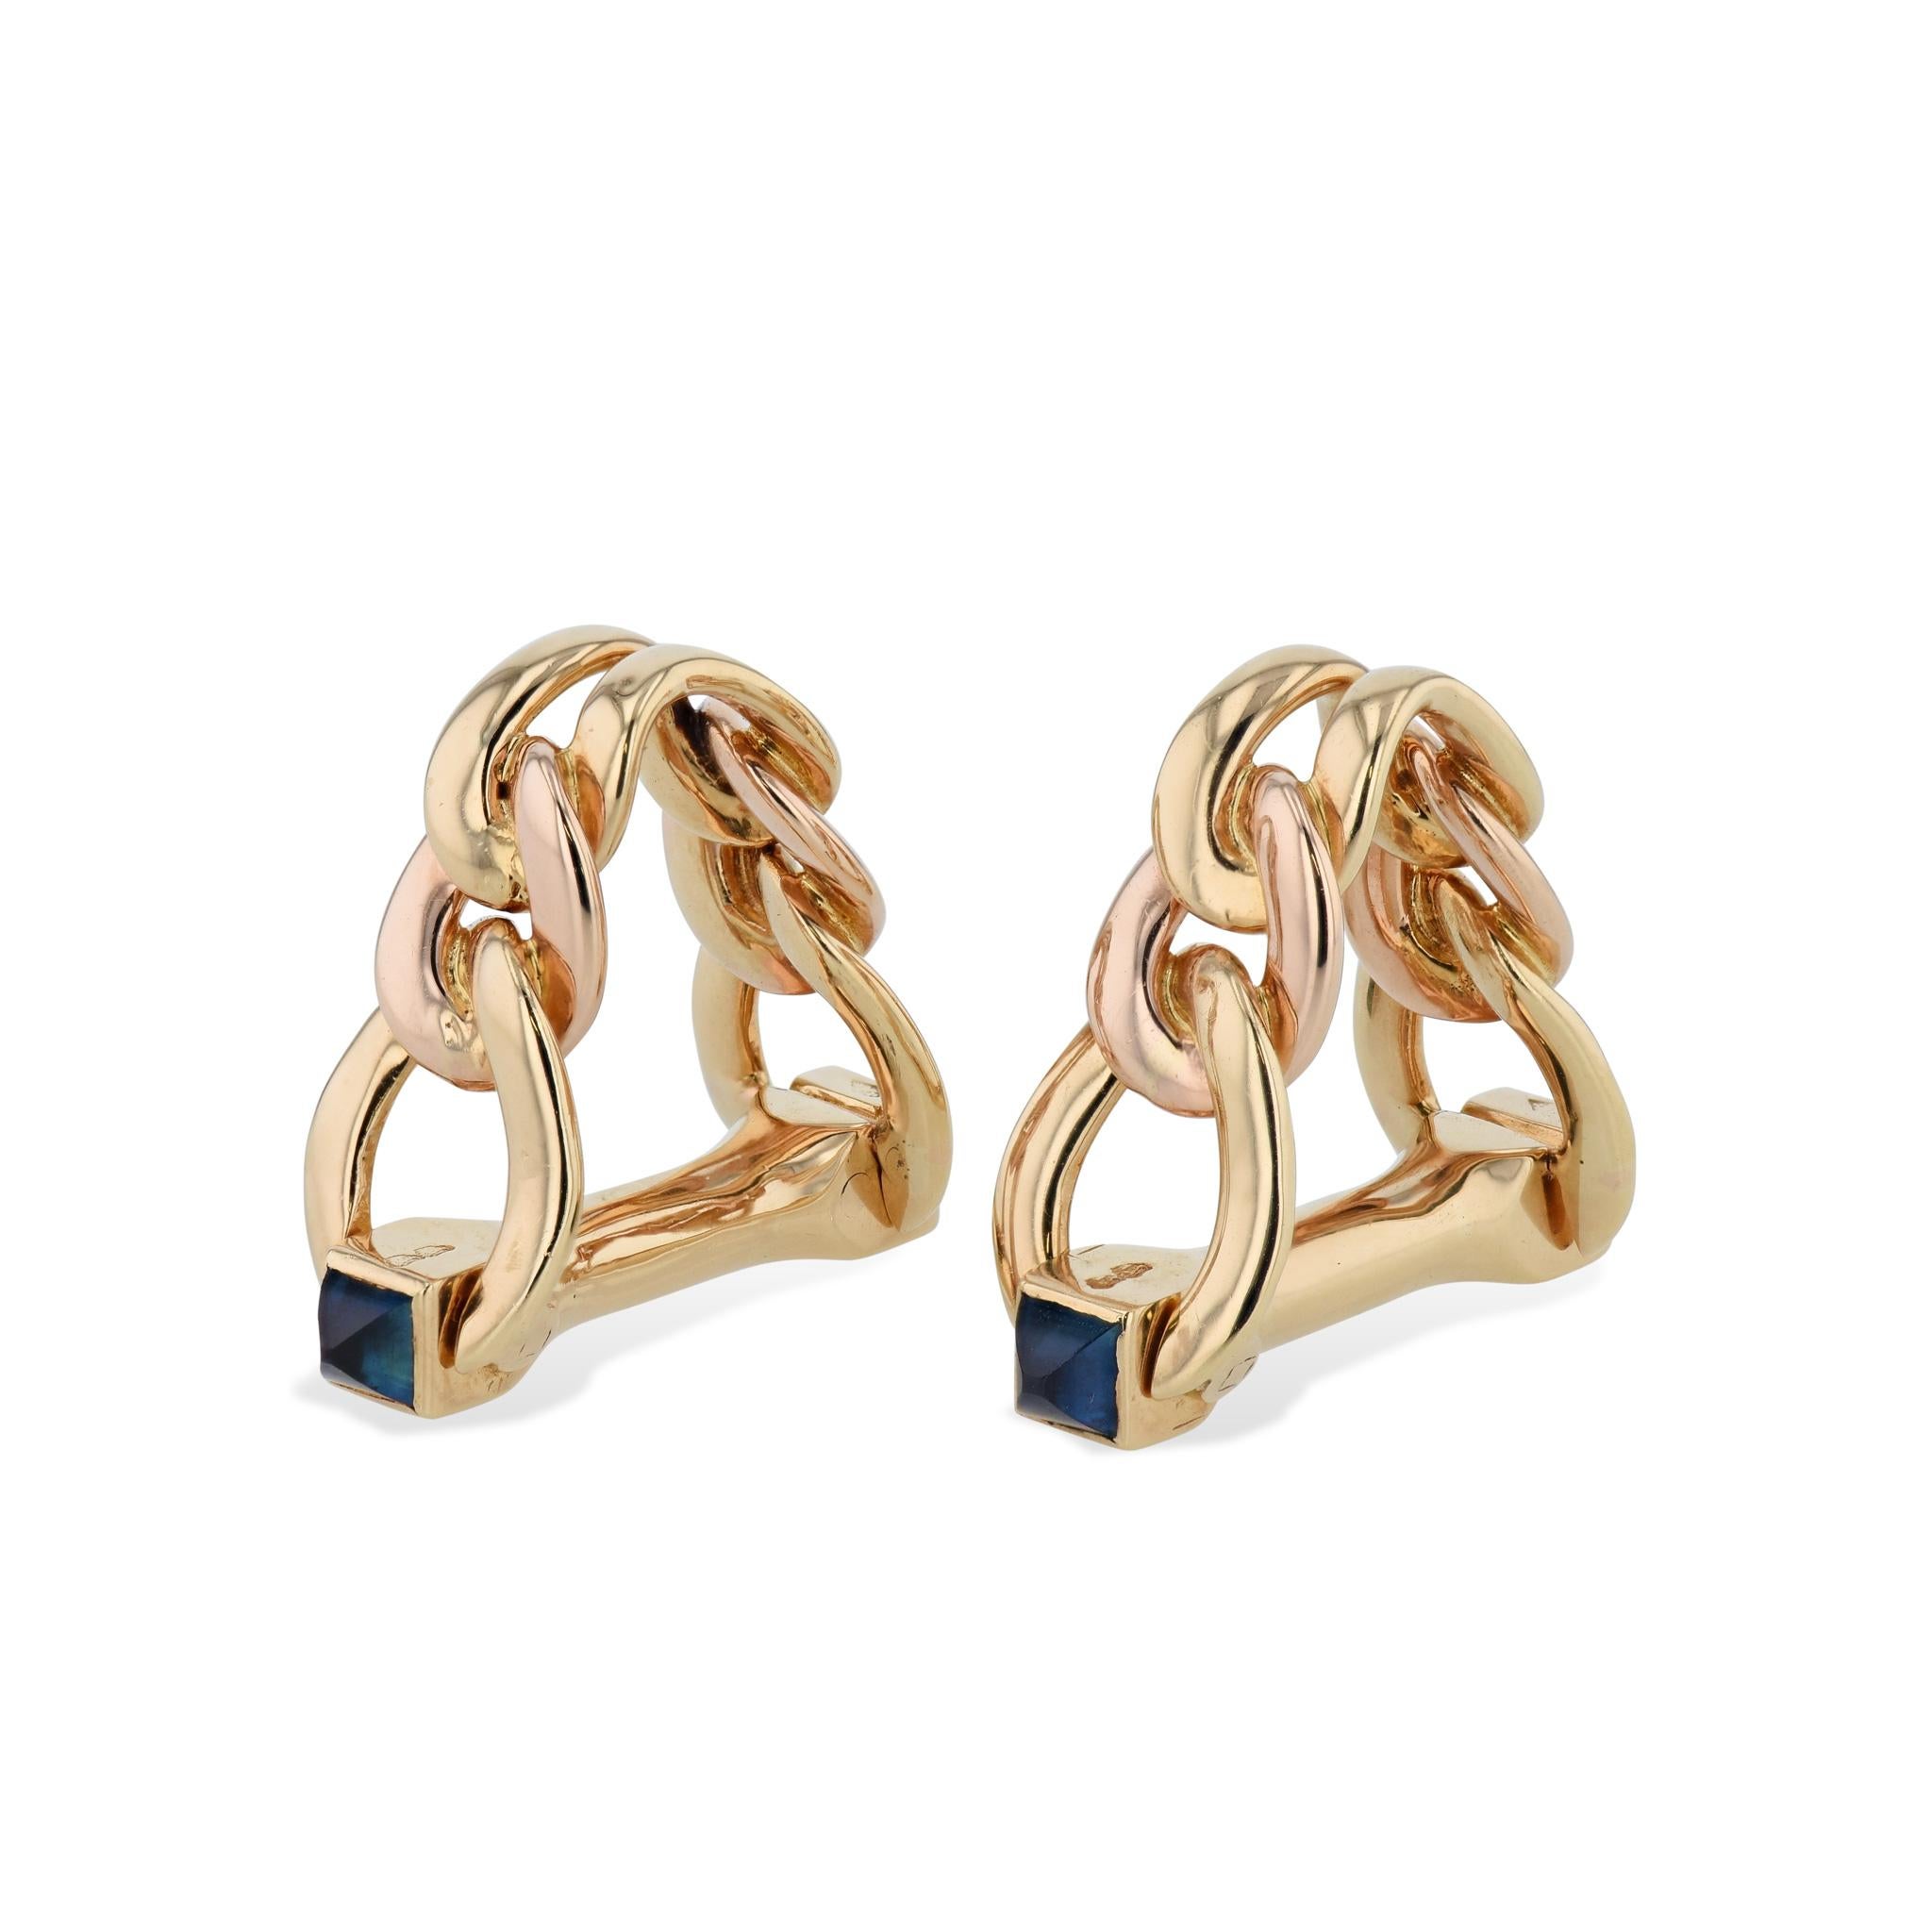 These Boucheron Paris Estate Cufflinks exude timeless elegance, crafted with 18kt. Yellow Gold and stunning Sugar loaf Cut Blue Sapphires. Circa 1960's, they make an unforgettable addition to any collection!
Sapphire Yellow Gold Boucheron Paris